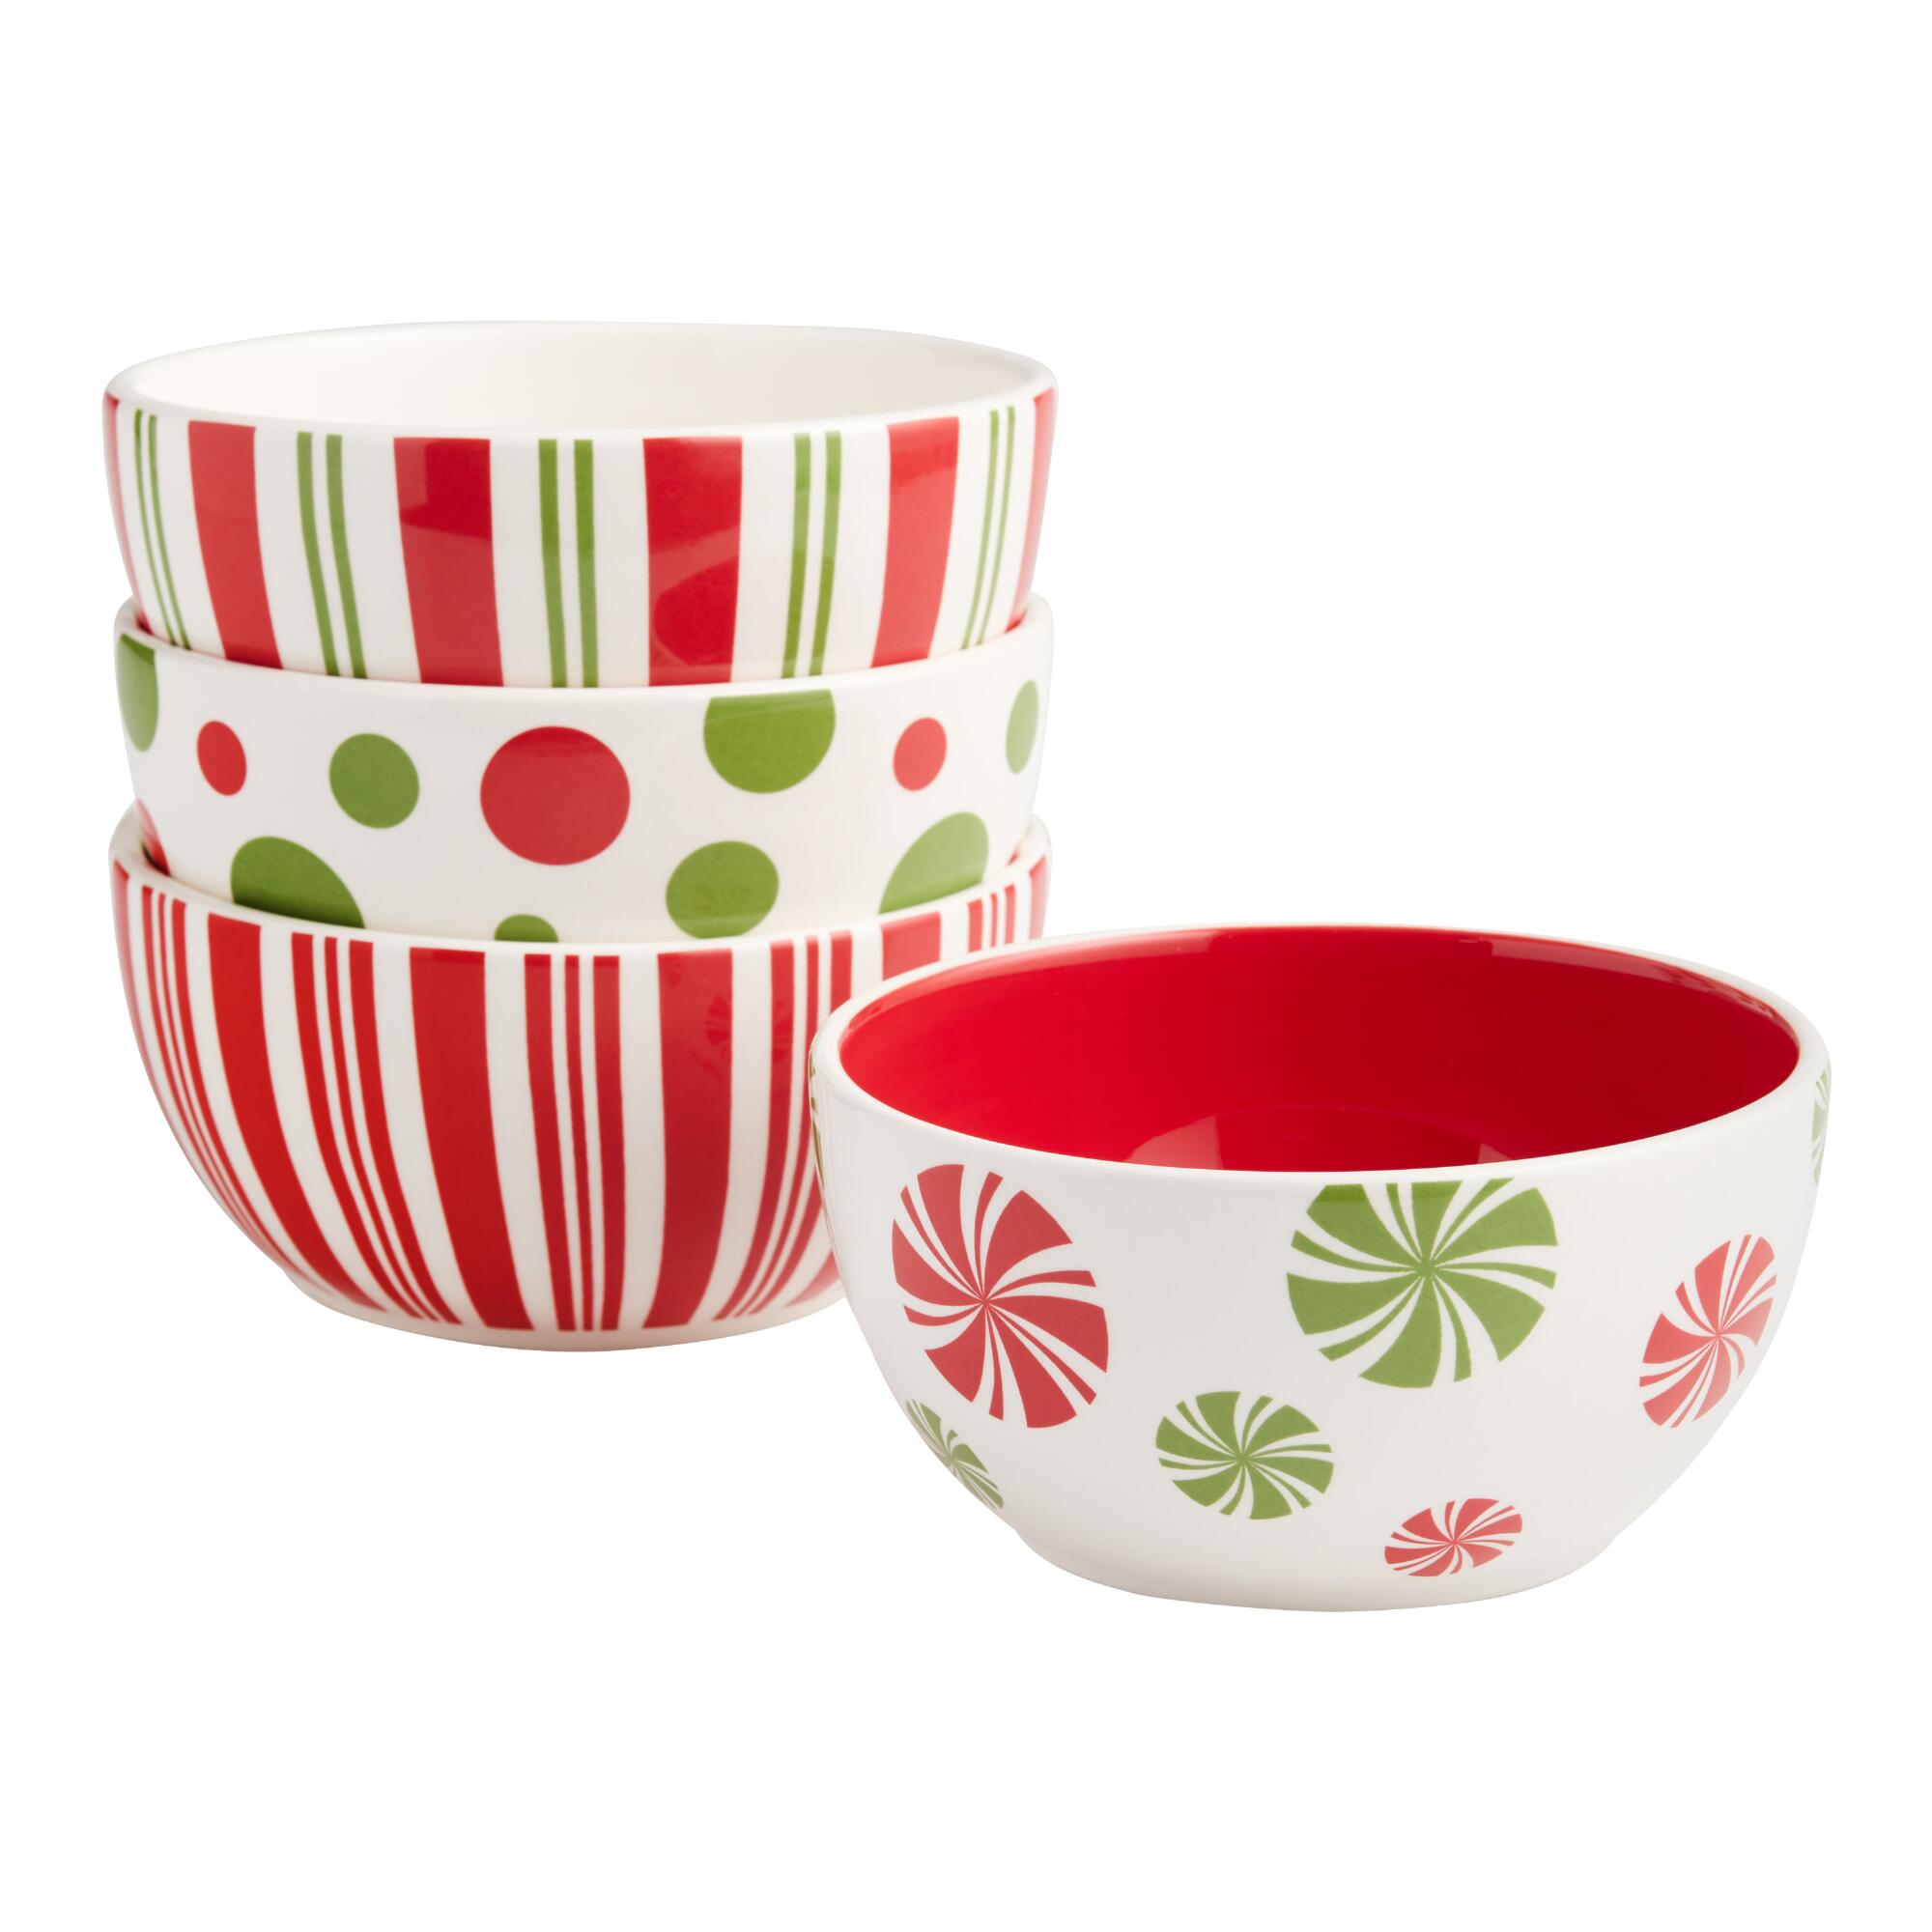 Pier Place Peppermint Party Bowls 4 Pack: Green/Red/White - Earthenware by World Market